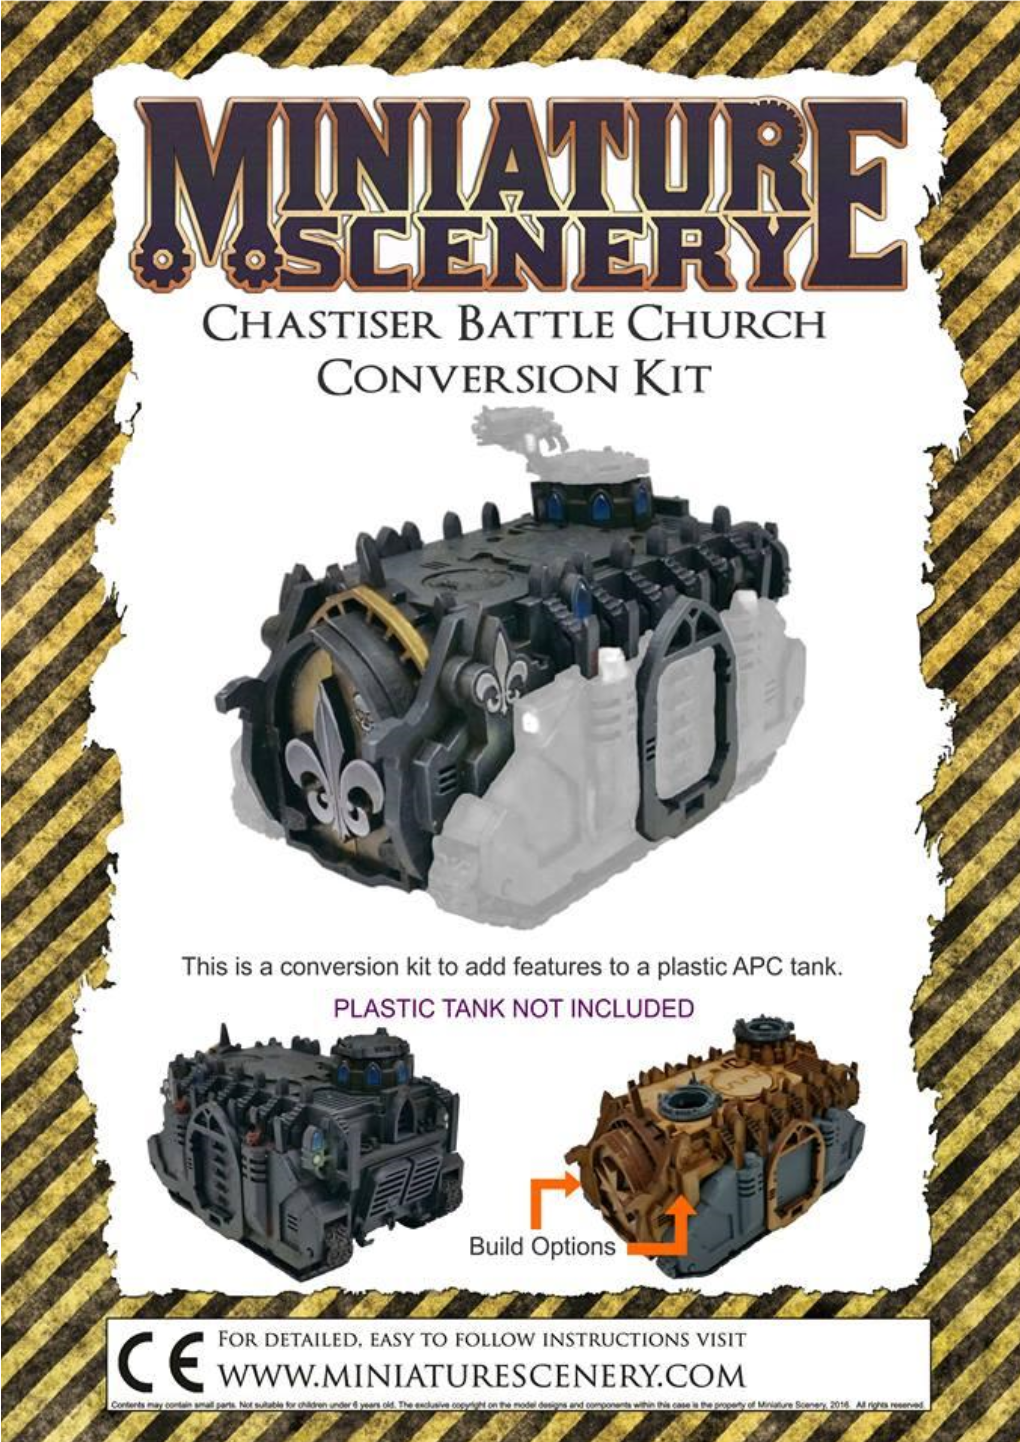 CHASTISER MOBILE BATTLE CHURCH CONVERSION KIT DISCLAIMER: This Model Kit Is Completely Unofficial and in No Way Endorsed by Games Workshop Lim- Ited